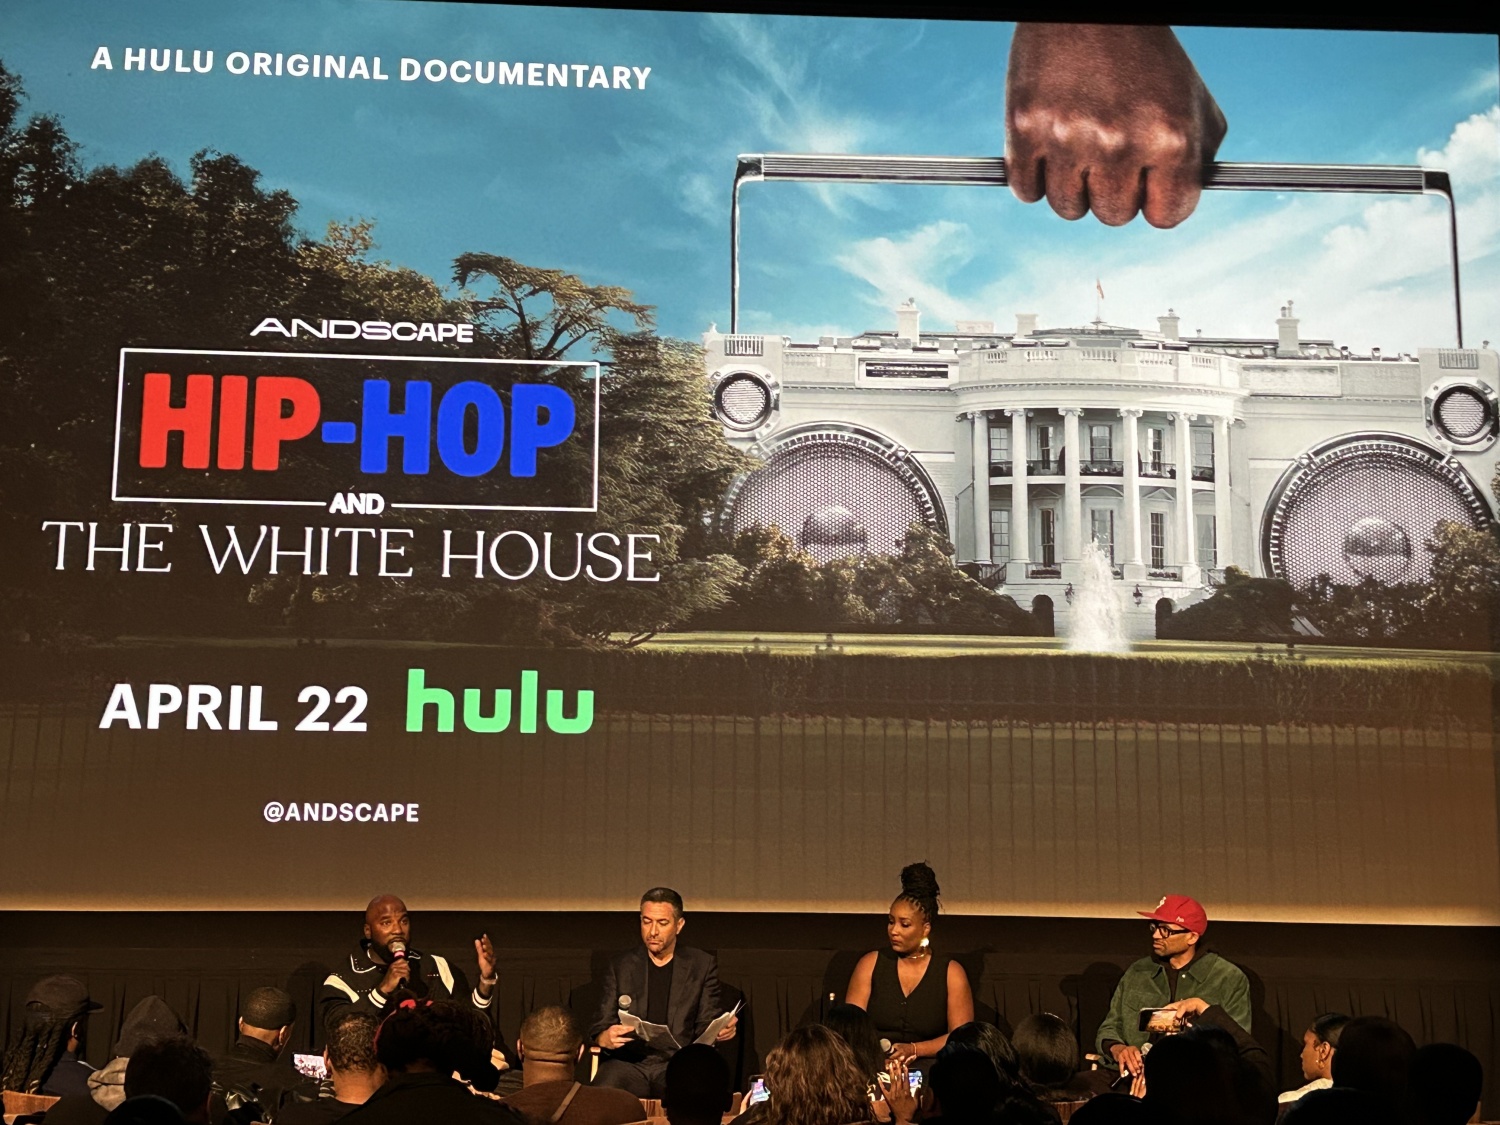 "Hip-Hop and the White House" discussion panel, with Jeezy, Ari Melber, Jordan Benston, and Jesse Washington.